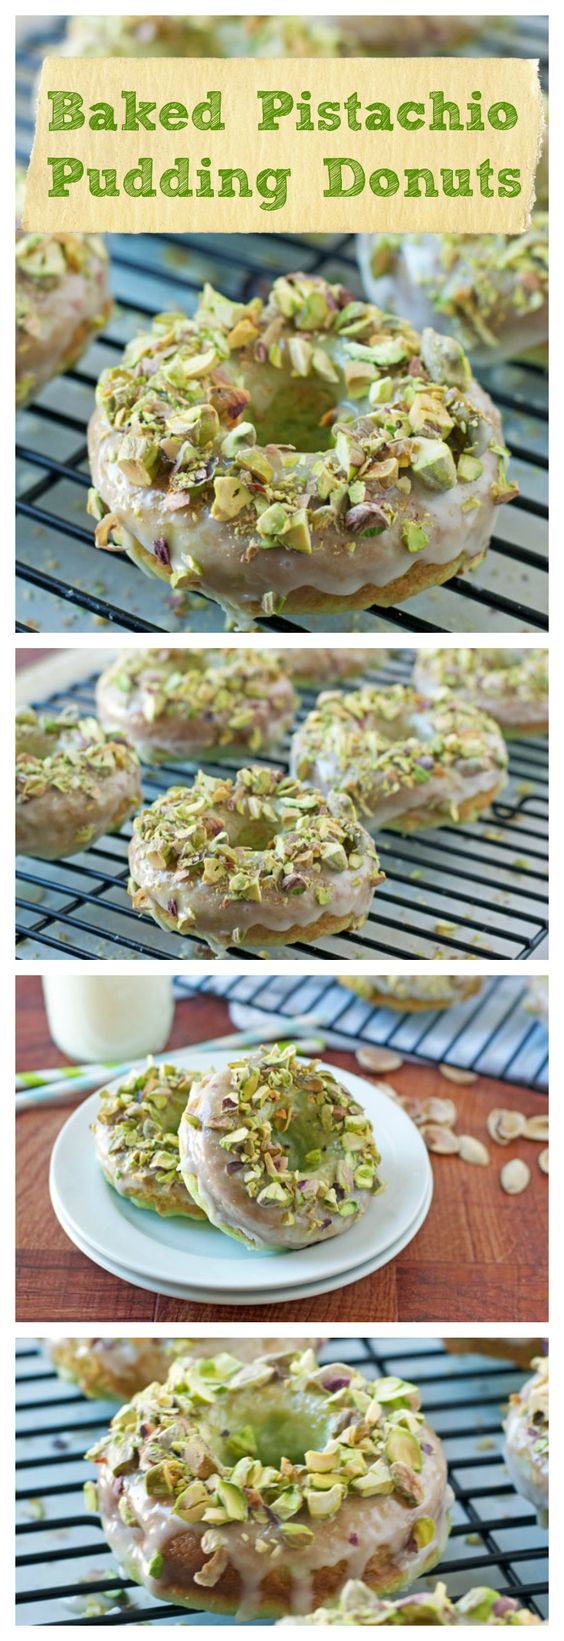 Nut Dessert Recipes: Baked Pistachio Pudding Donuts